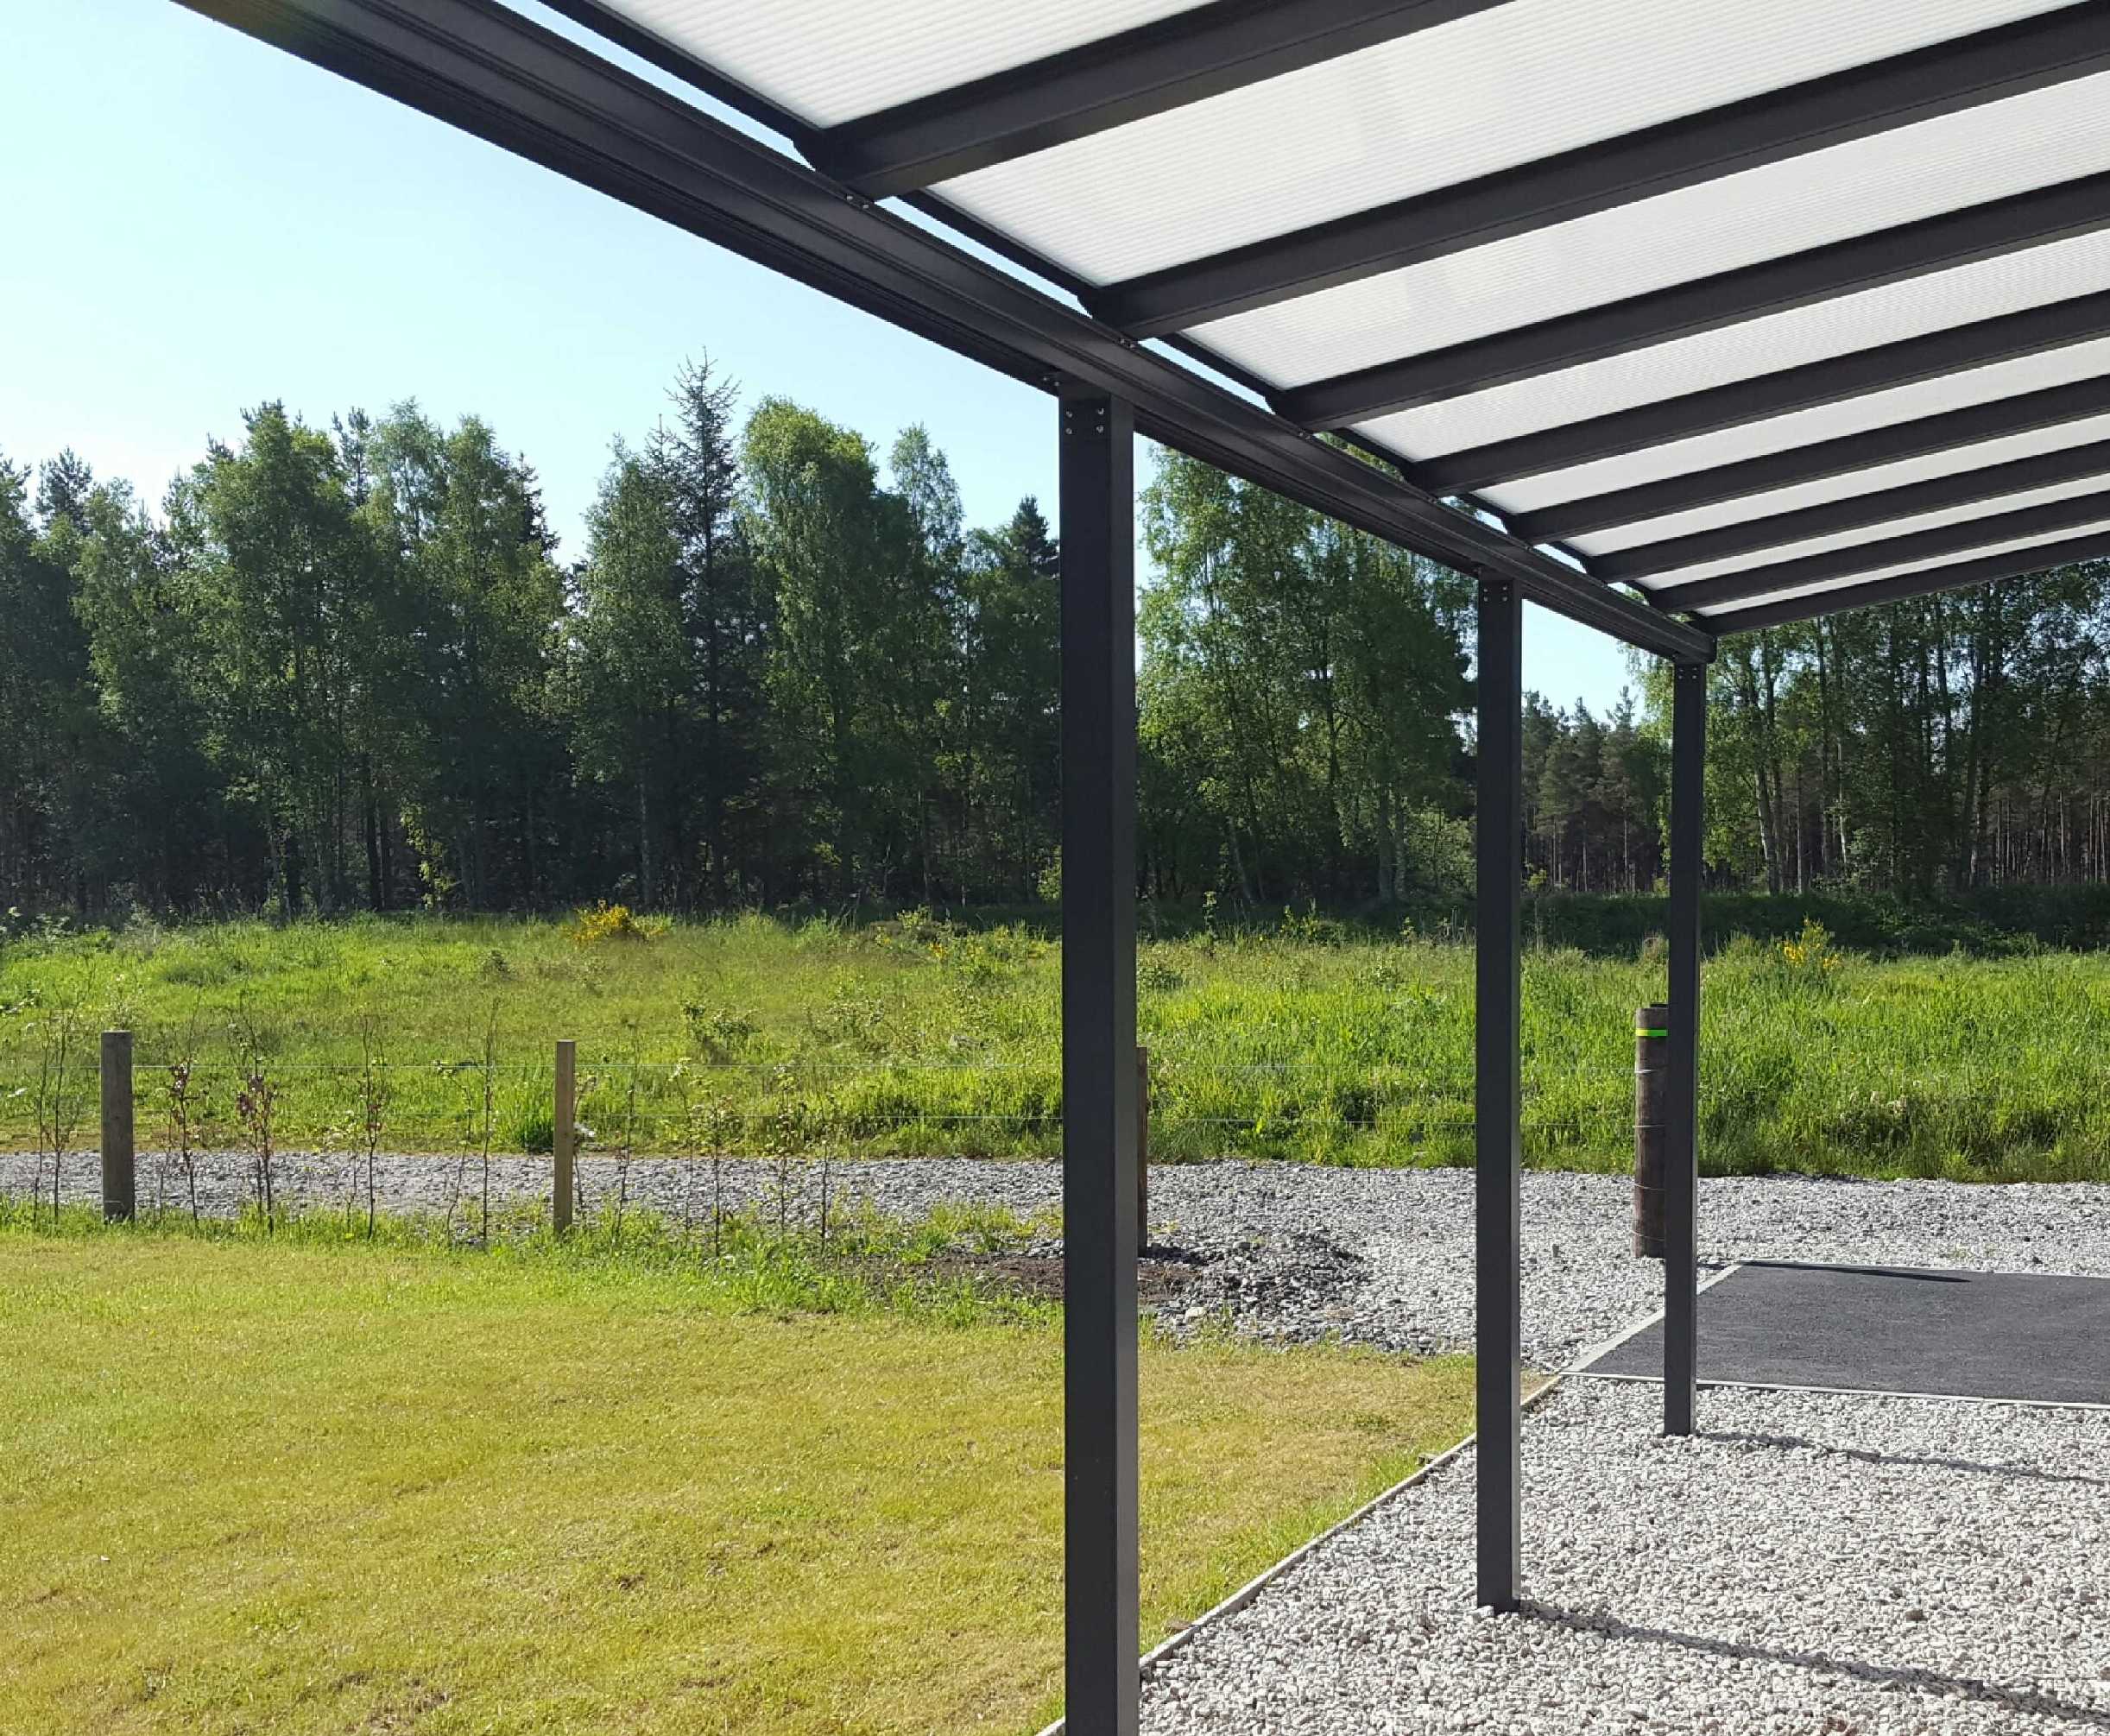 Omega Smart Lean-To Canopy, Anthracite Grey, 6mm Glass Clear Plate Polycarbonate Glazing - 6.3m (W) x 2.0m (P), (4) Supporting Posts